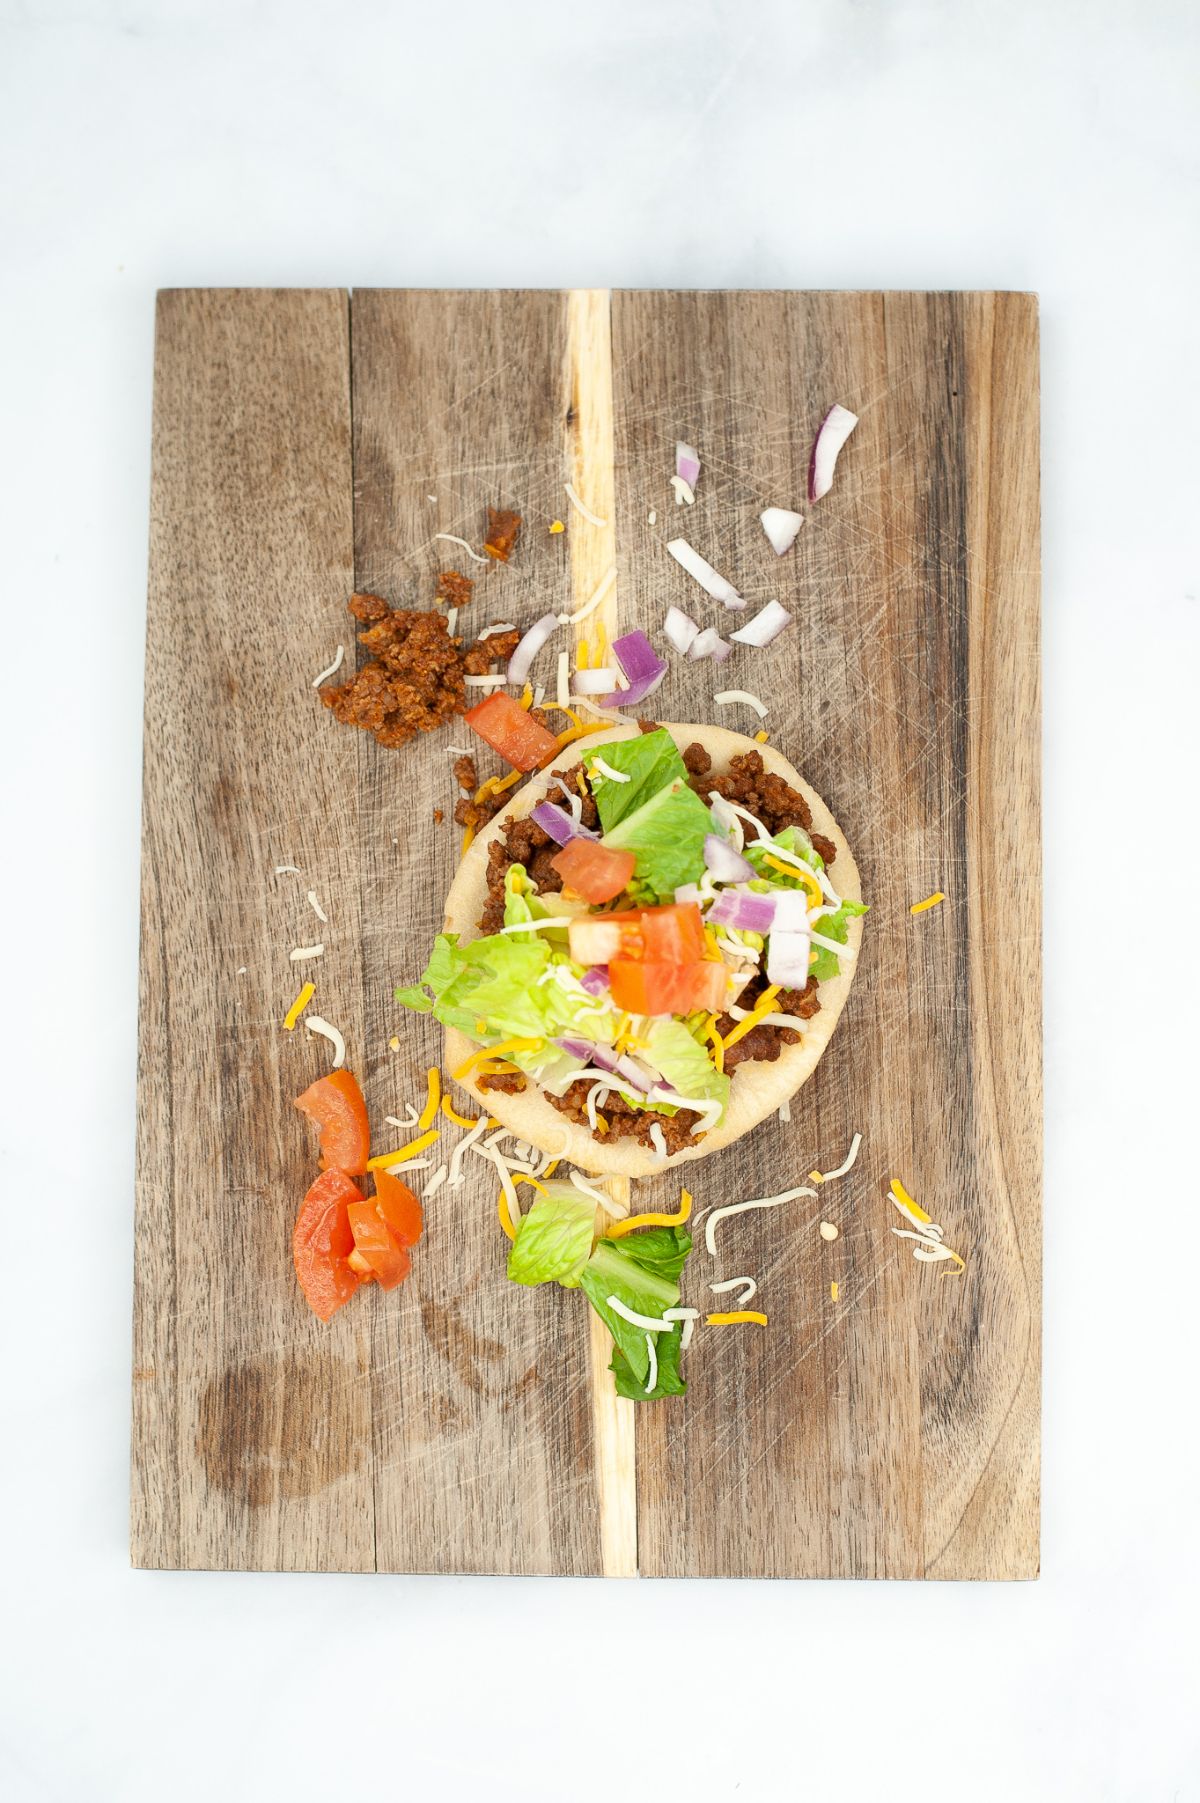 Taco fry bread on a wooden chopping board being topped with taco meat, lettuce, cheese, onion, and tomatoes.